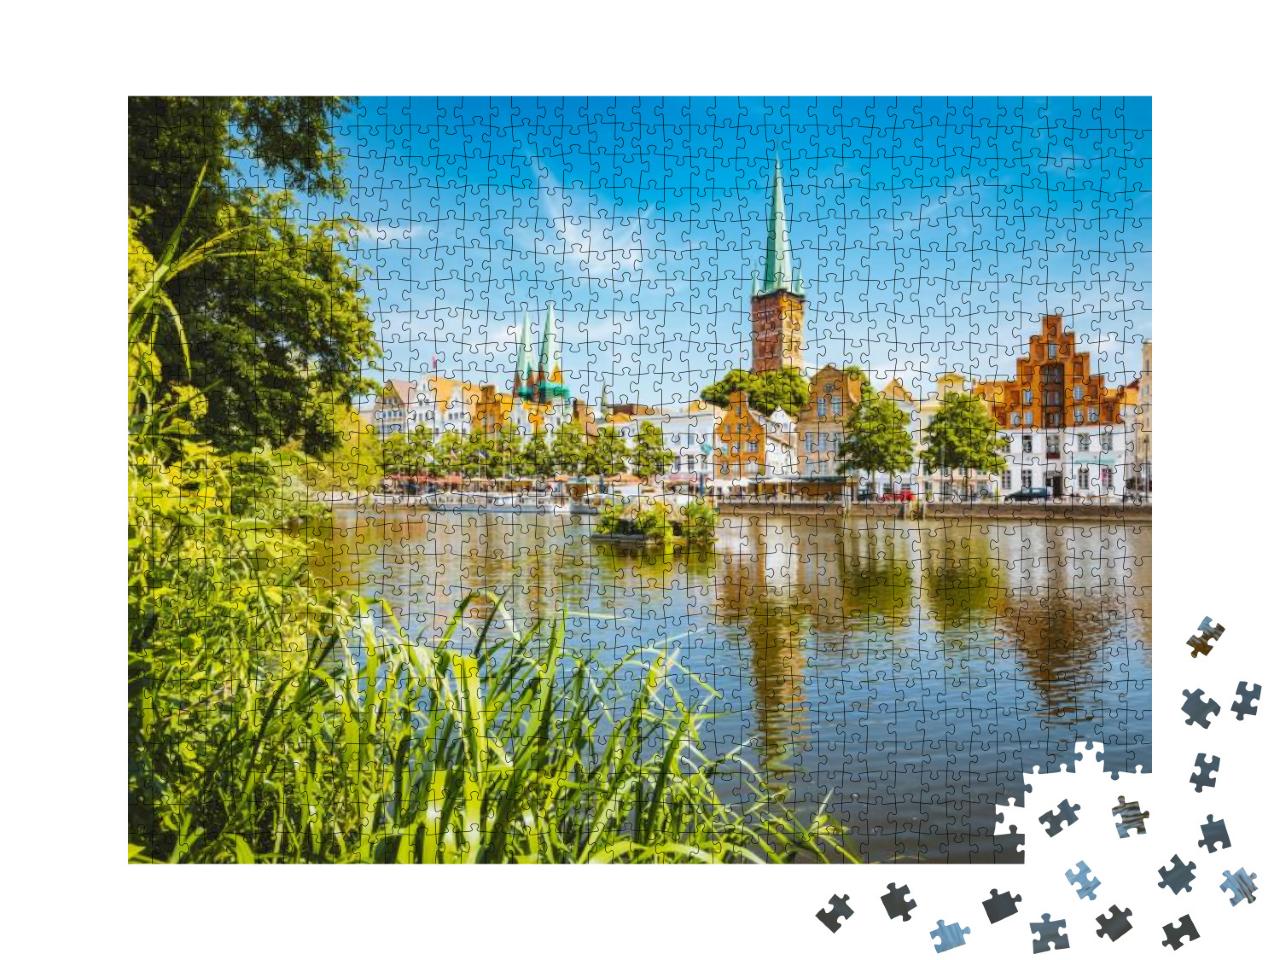 Classic Panorama View of the Historic City of Luebeck wit... Jigsaw Puzzle with 1000 pieces